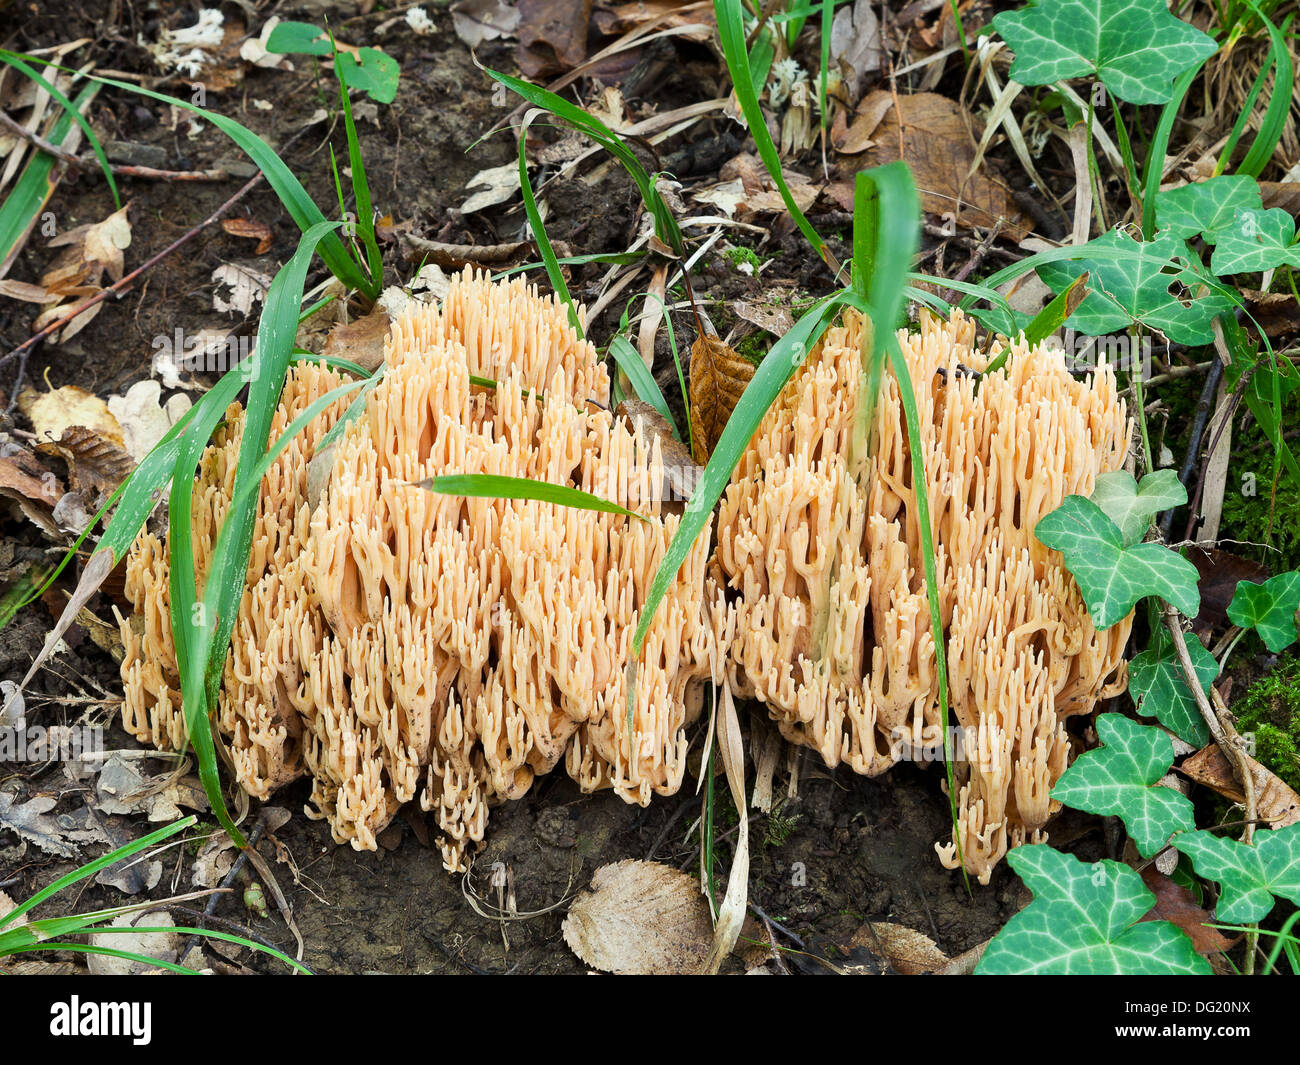 ramaria stricta (strict-branch coral) mushrooms in autumn litter Stock Photo